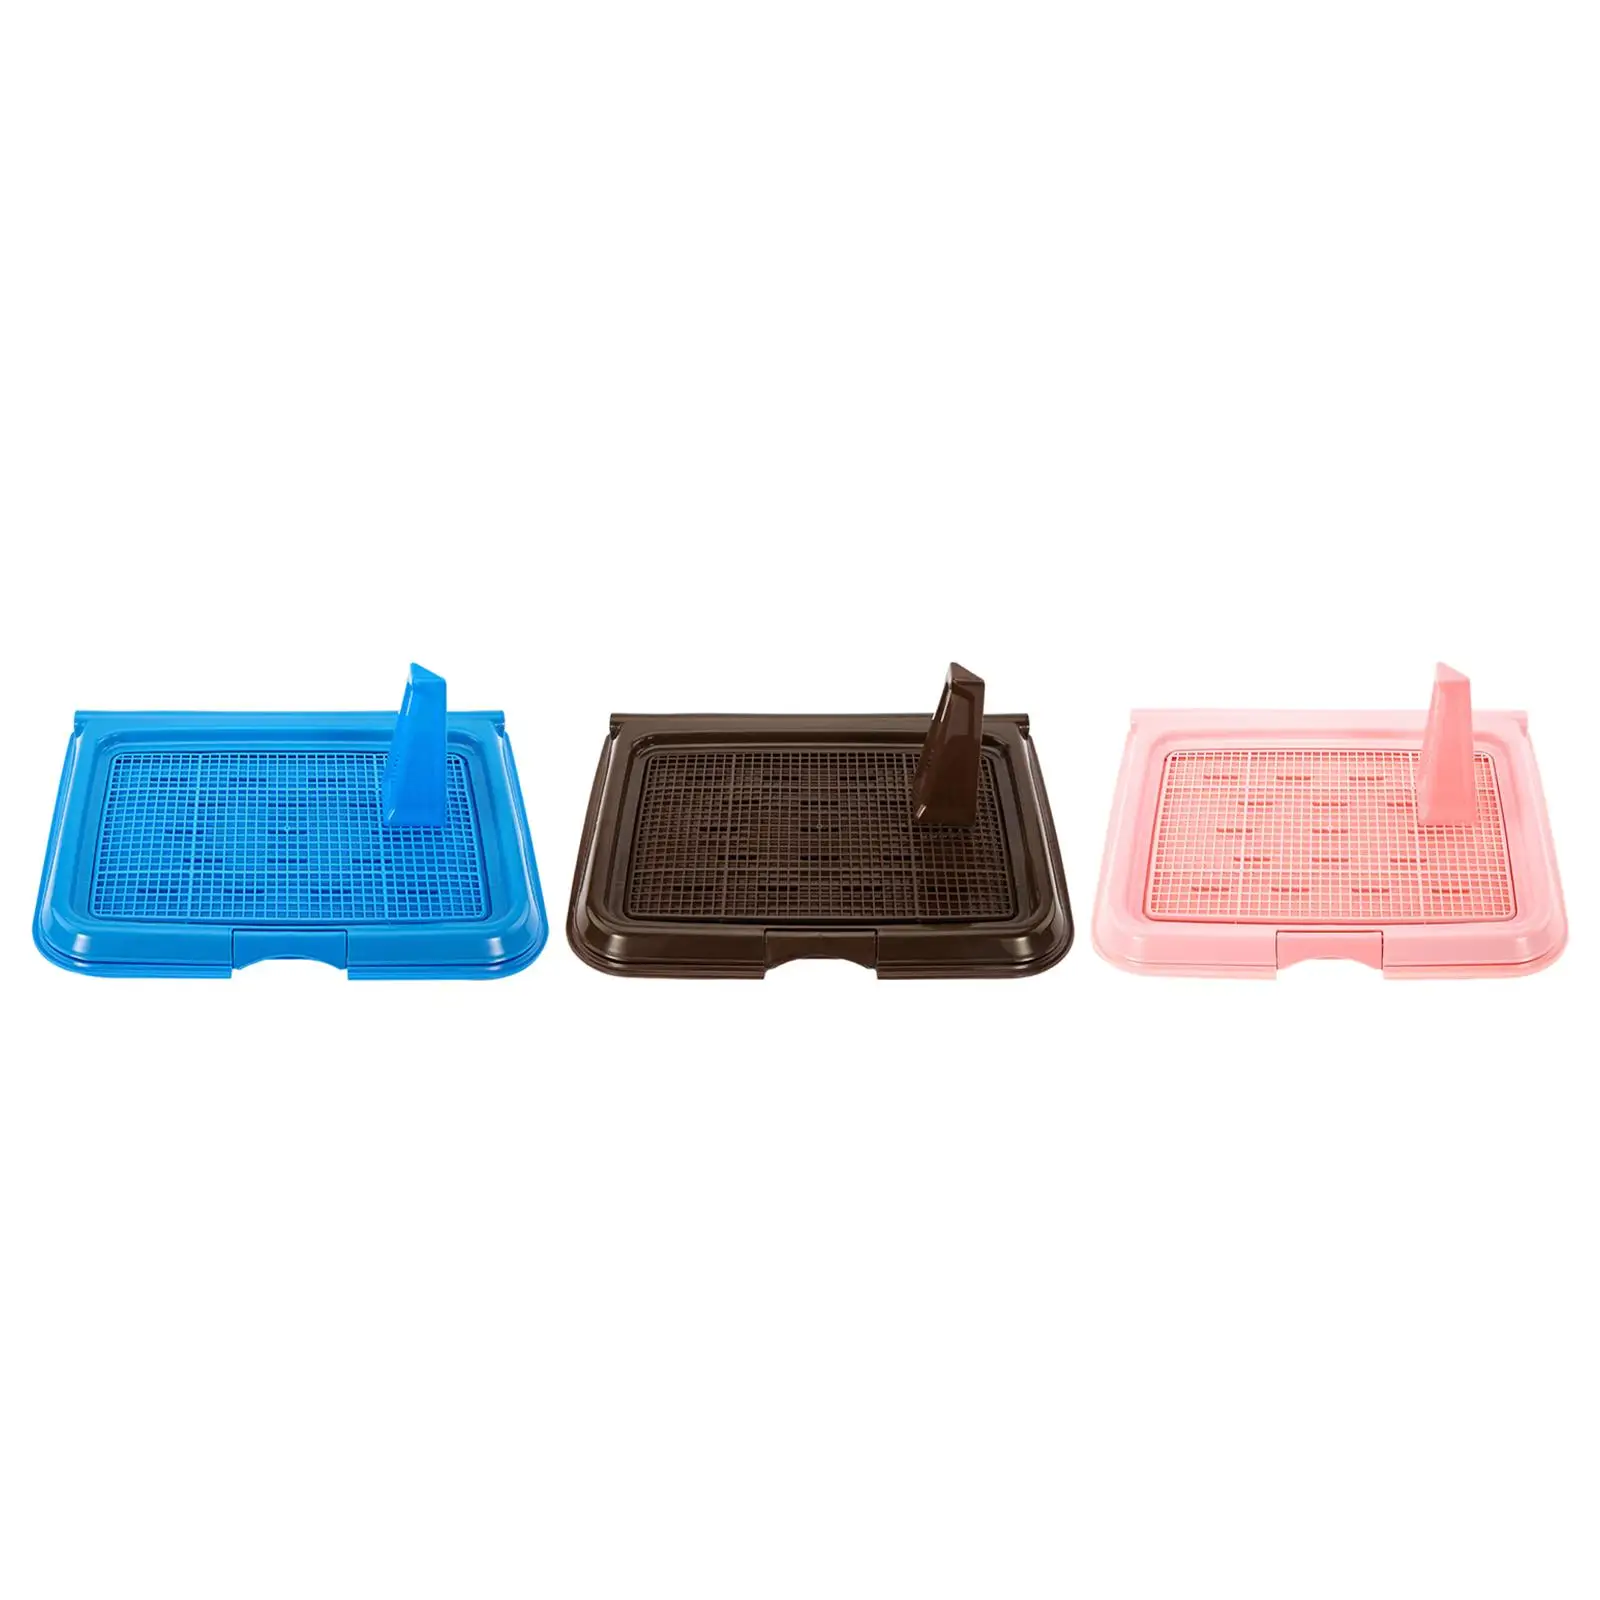 Dog Potty Tray Easy to Clean Pee Pad Holder Other Pets Bunny Pet Supplies Non Slip Small Animals Dogs Toilet Training Potty Tray